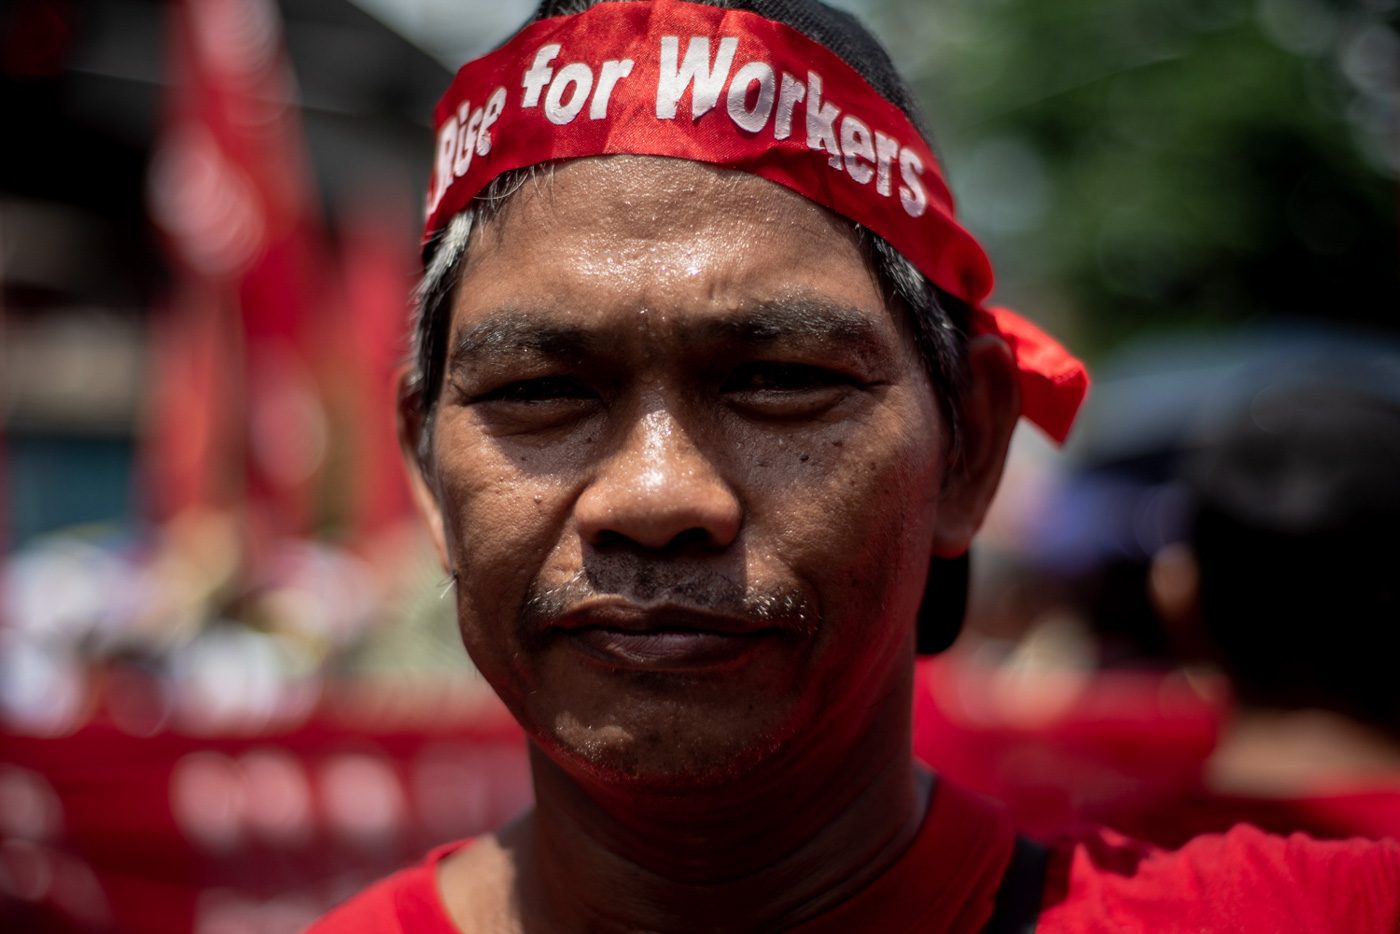 What brought workers, students to Labor Day 2018 rally